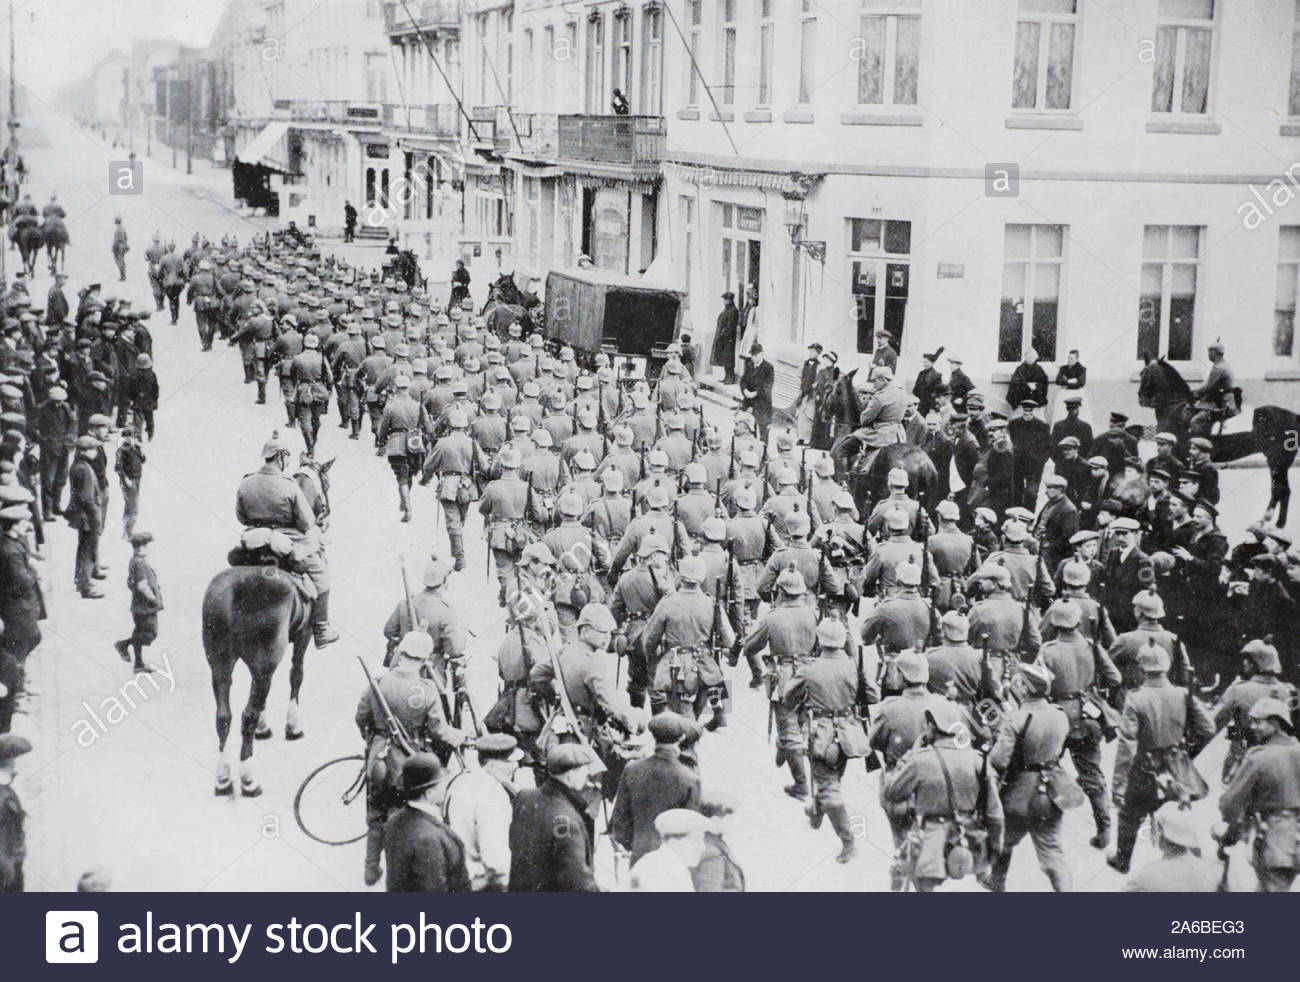 WW1 German Troops Marching through Blankenberge Belgium, vintage photograph from 1914 Stock Photo